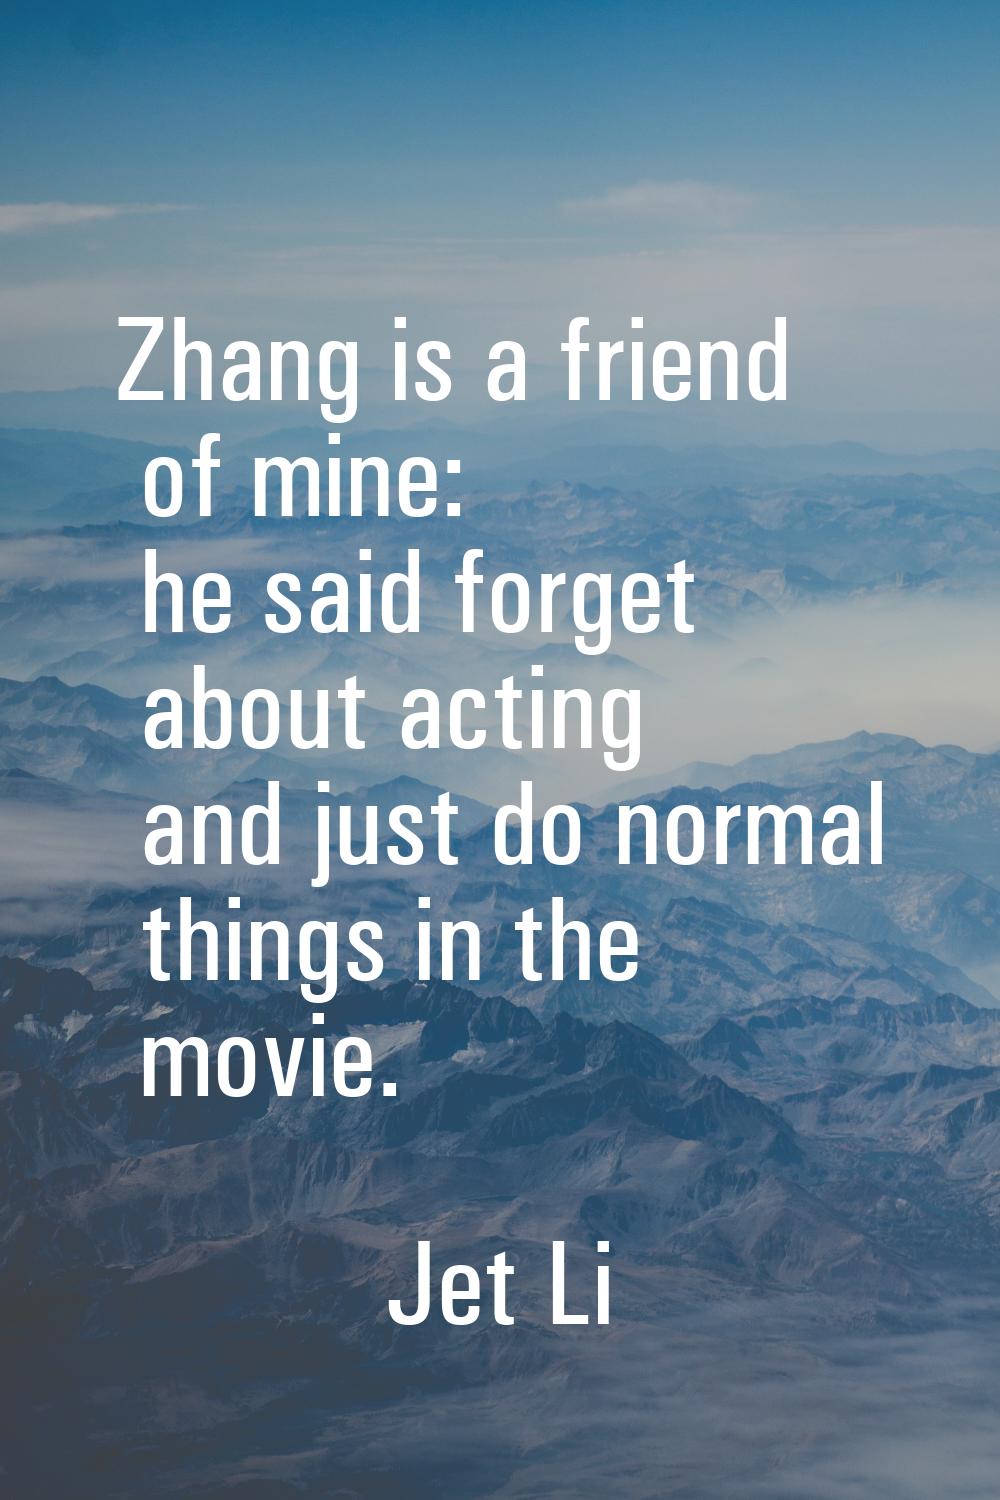 Zhang is a friend of mine: he said forget about acting and just do normal things in the movie.